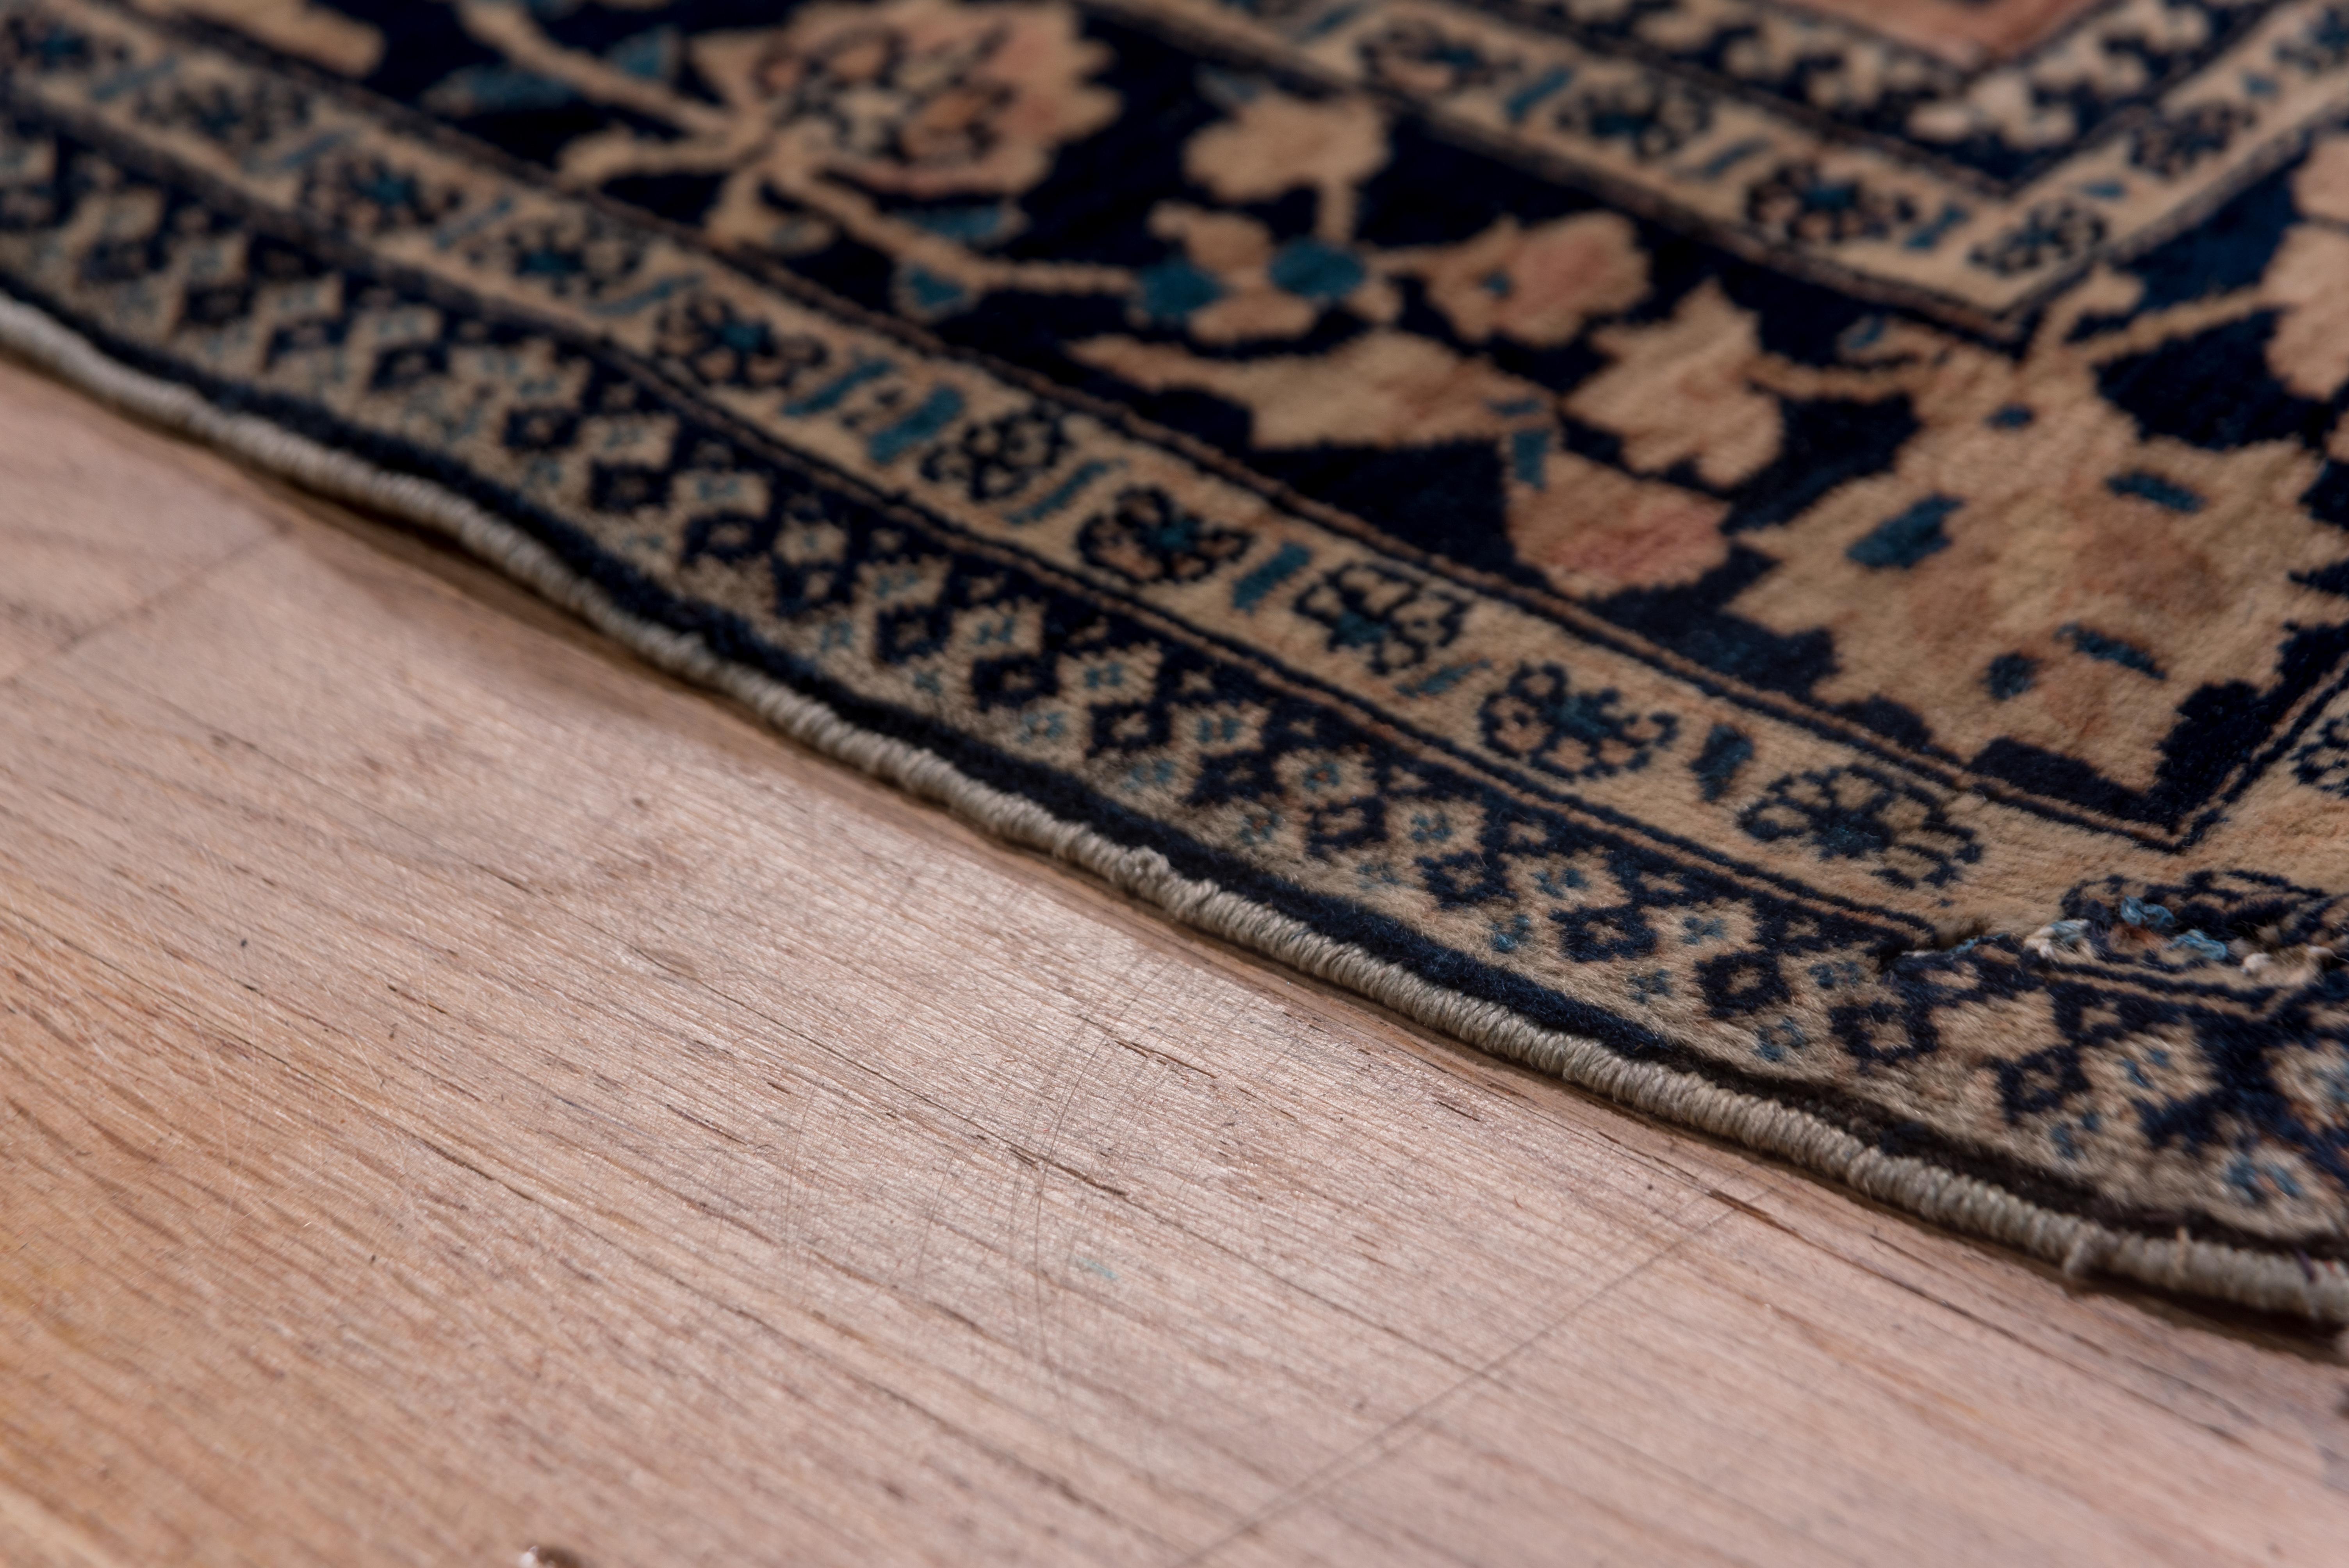 This rare mansion-sized central Persian city carpet in good condition features a navy field filled with actively curling floral tendrils, supporting a layered rose and sand pendanted medallion, strongly accented with cerulean blue spiral vinery.